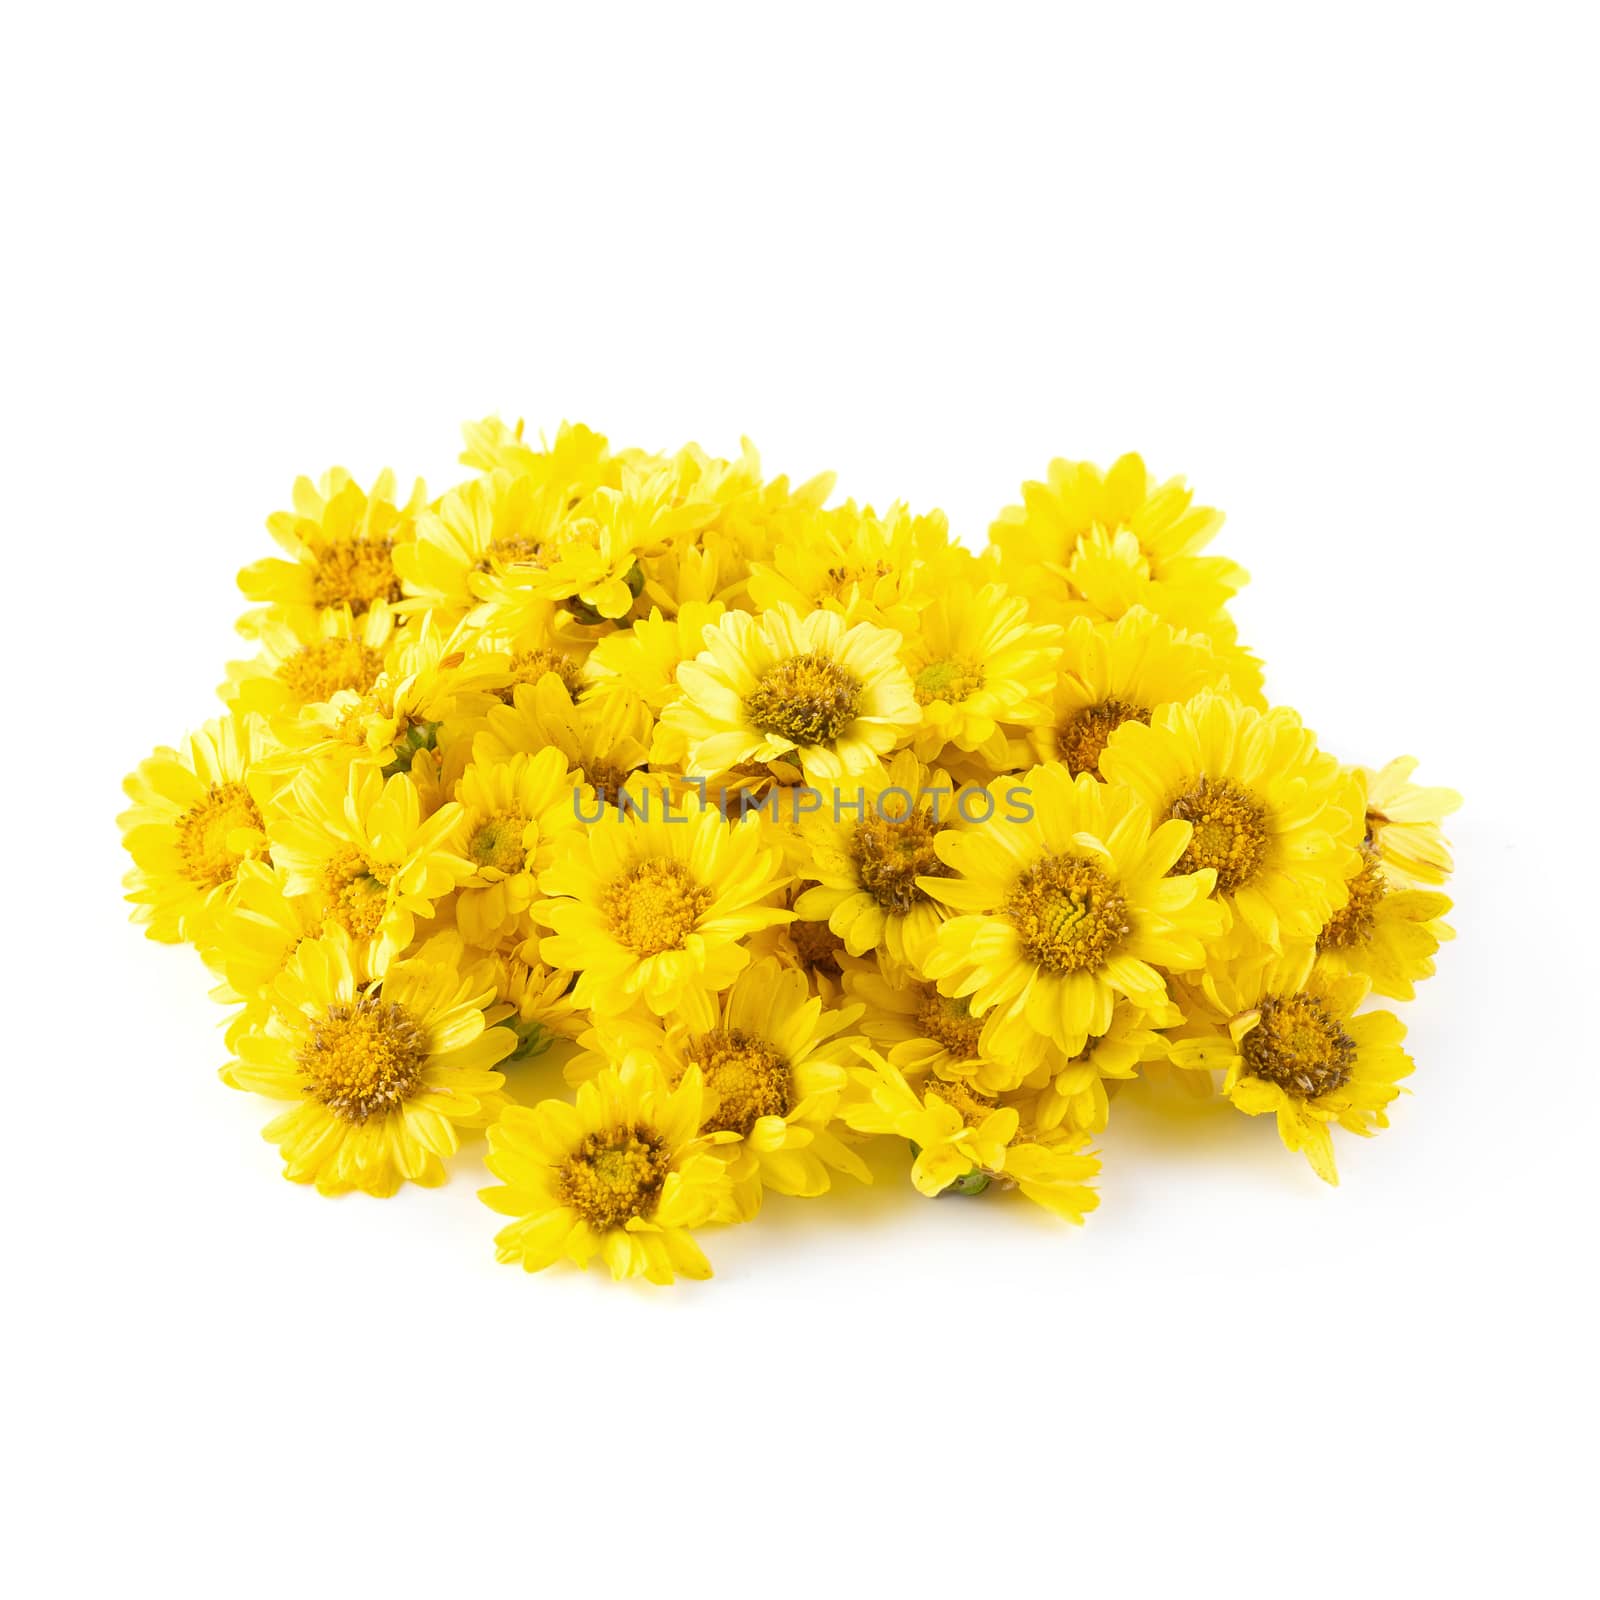 Yellow Chrysanthemum flowers isolated on white background by kaiskynet